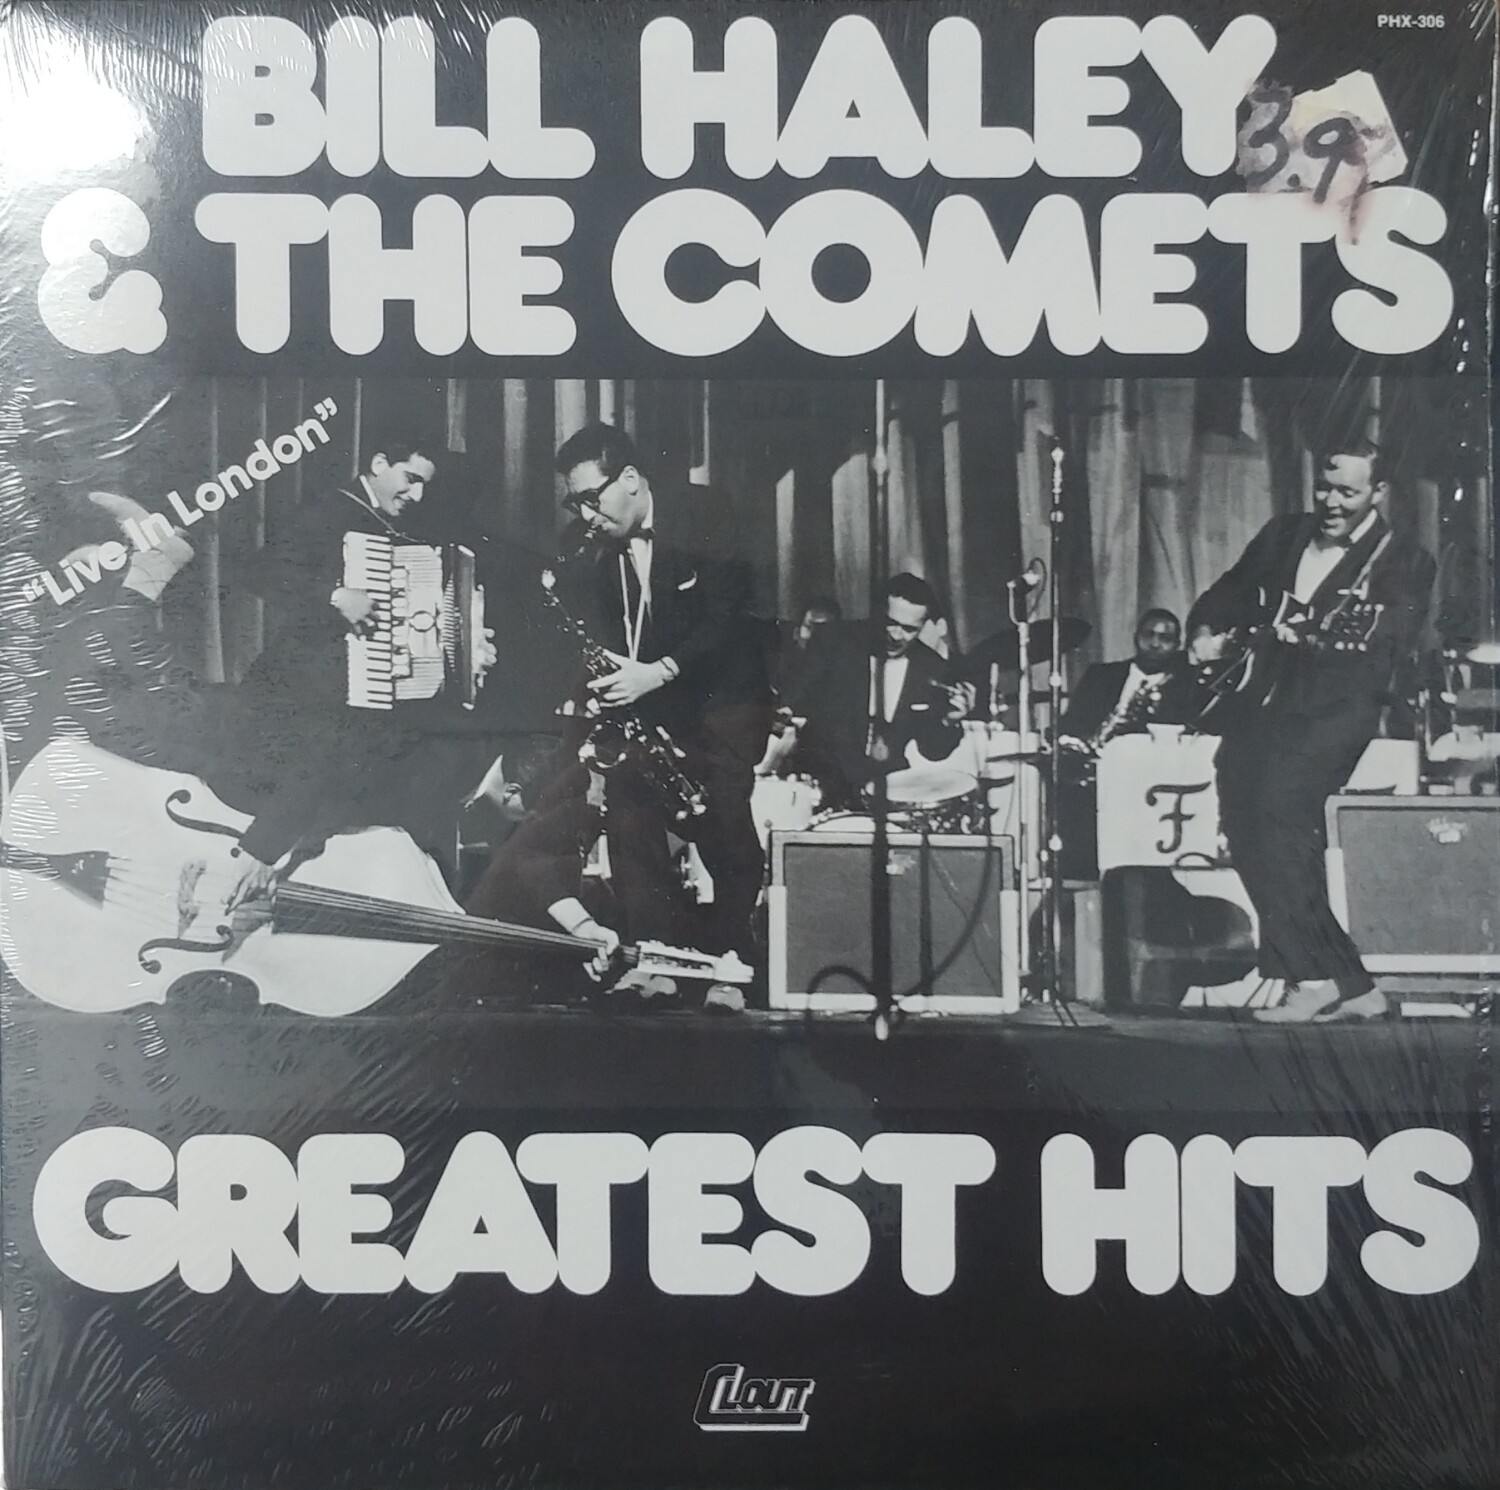 Bill Haley & The Comets - Greatest Hits Live in London